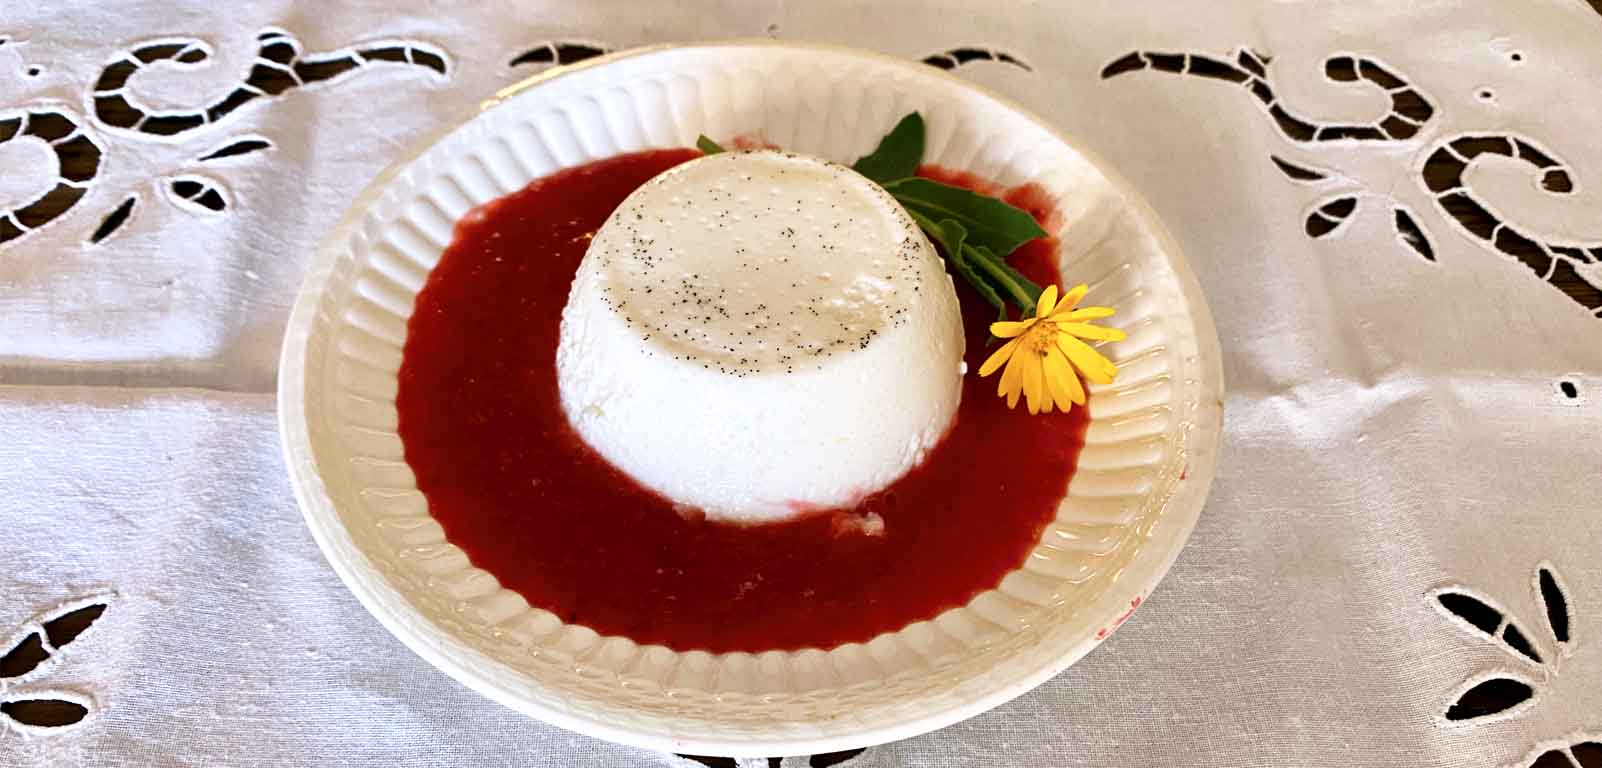 May 21: Chicca’s Panna Cotta Class